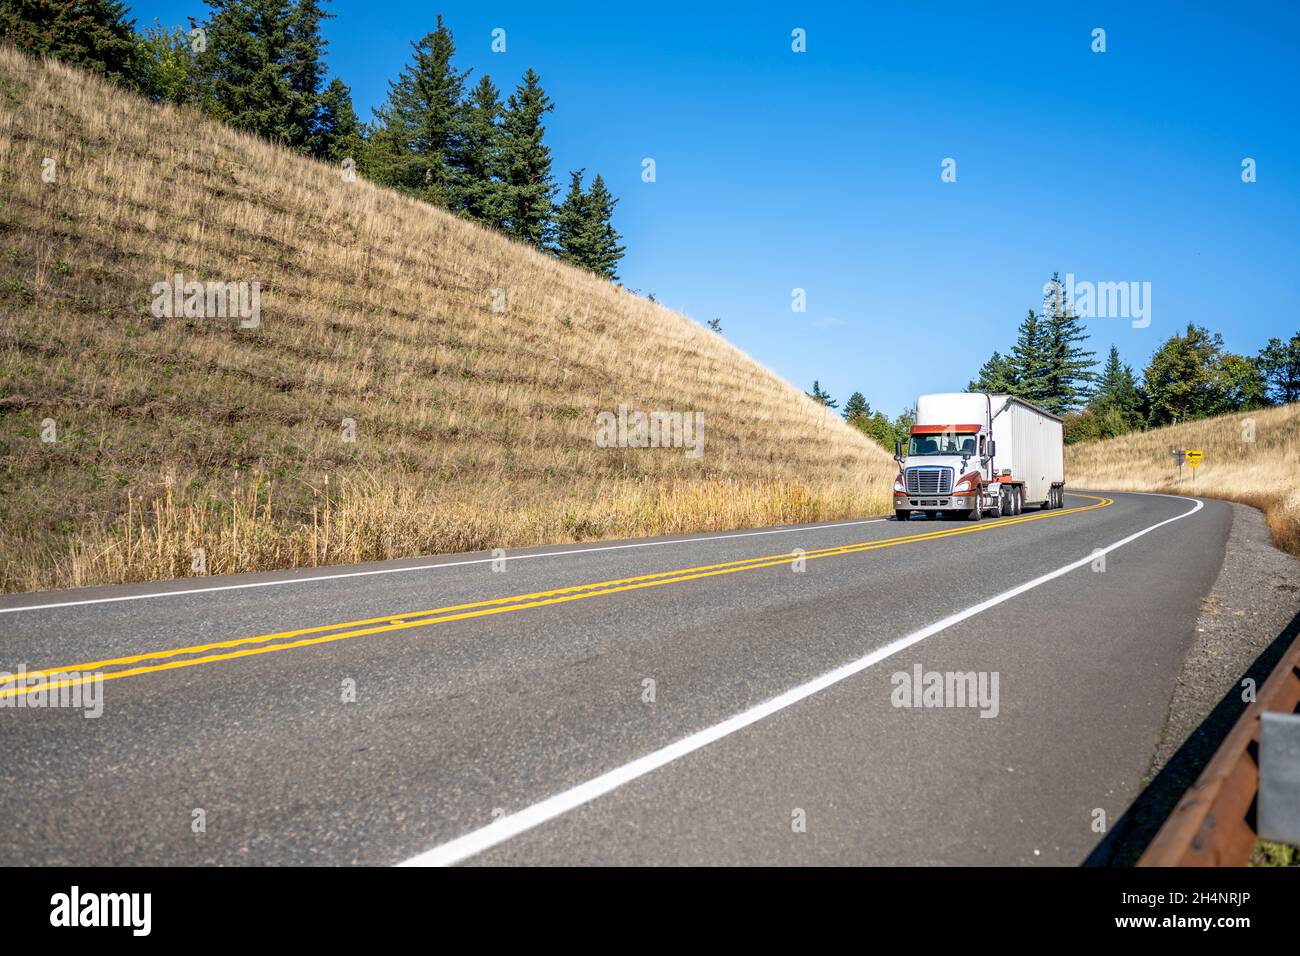 Big rig white semi truck with high cab transporting commercial cargo in covered bulk semi trailer running for delivery turning on the winding mountain Stock Photo